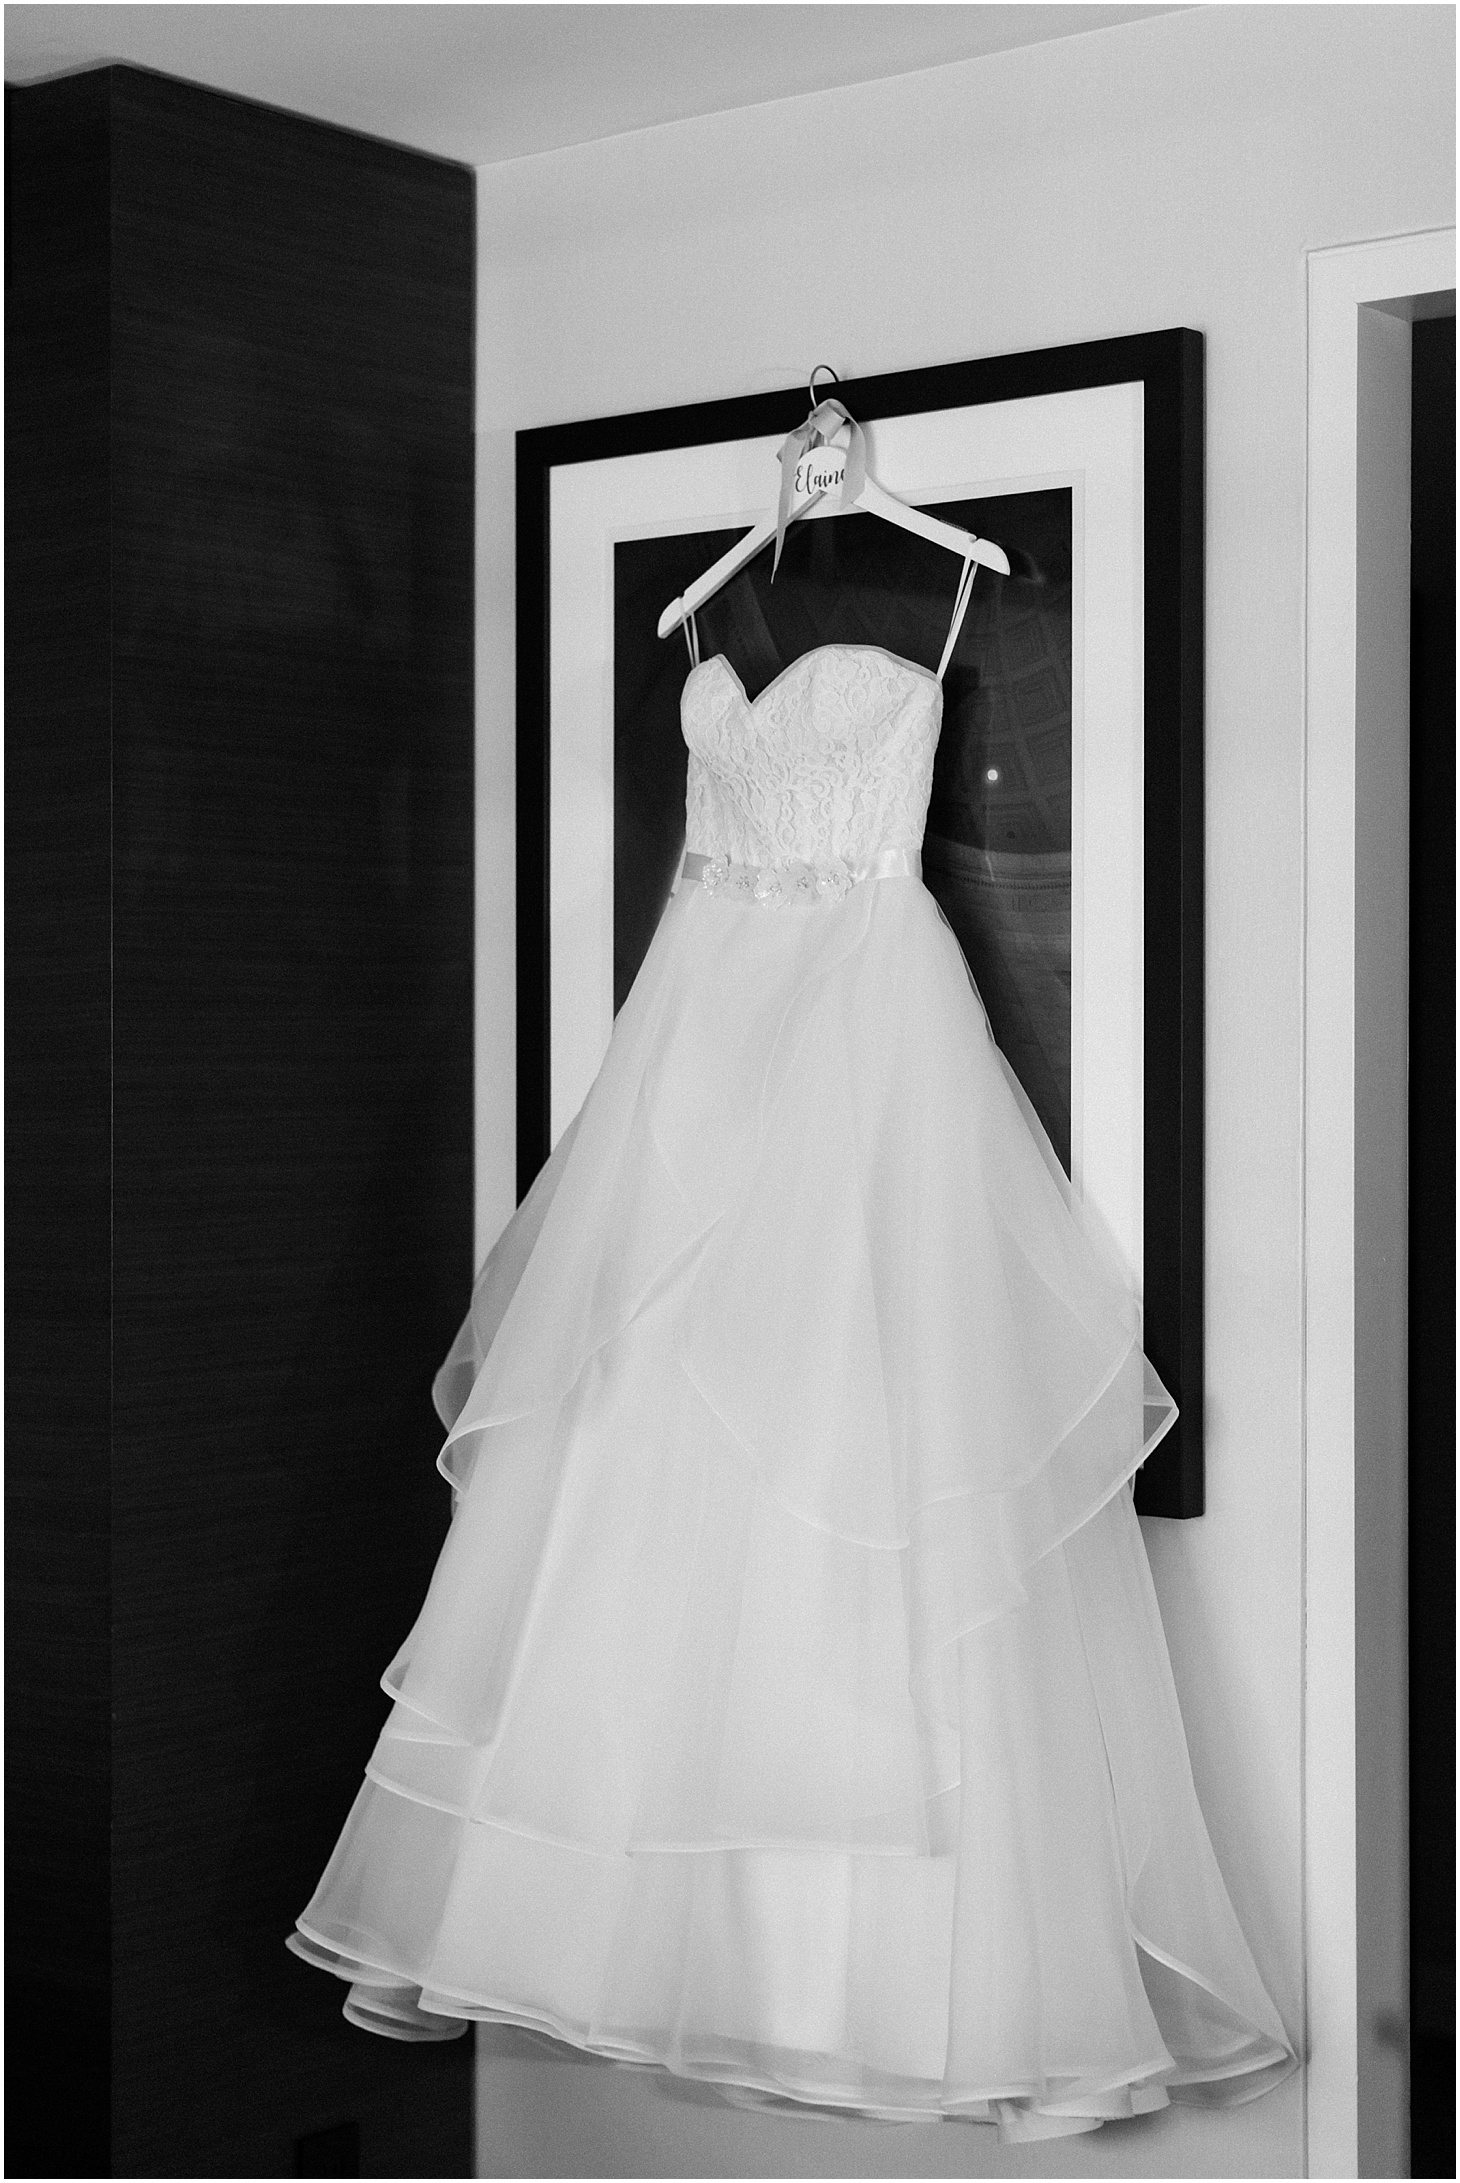 Mikaella Wedding Gown in Suite at Grand Hyatt , Museum-Inspired Spring Wedding at National Museum of Women in the Arts, Sarah Bradshaw Photography, DC Wedding Photographer